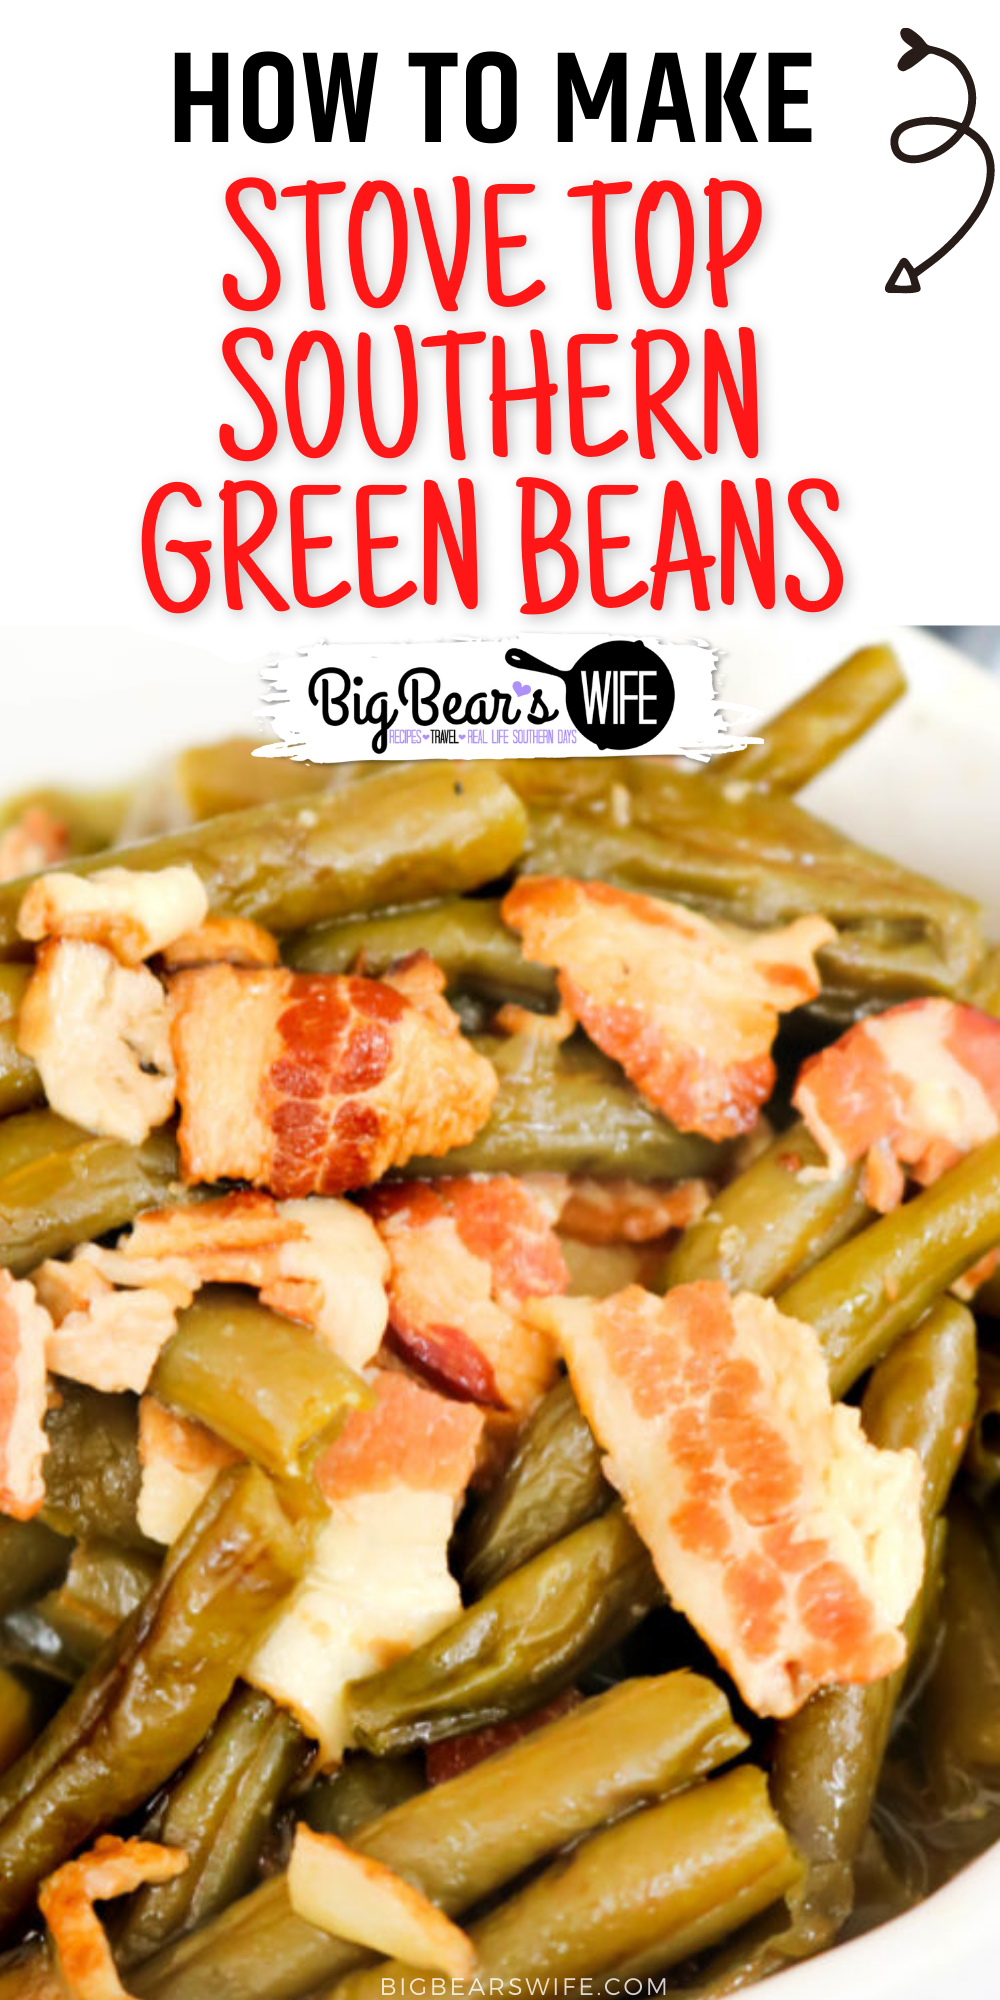 Stove Top Southern Green Beans - Stove Top Southern Green Beans are amazing and super easy to make! They're simmered all day long to create the most flavorful green beans ever! @bigbearswife via @bigbearswife